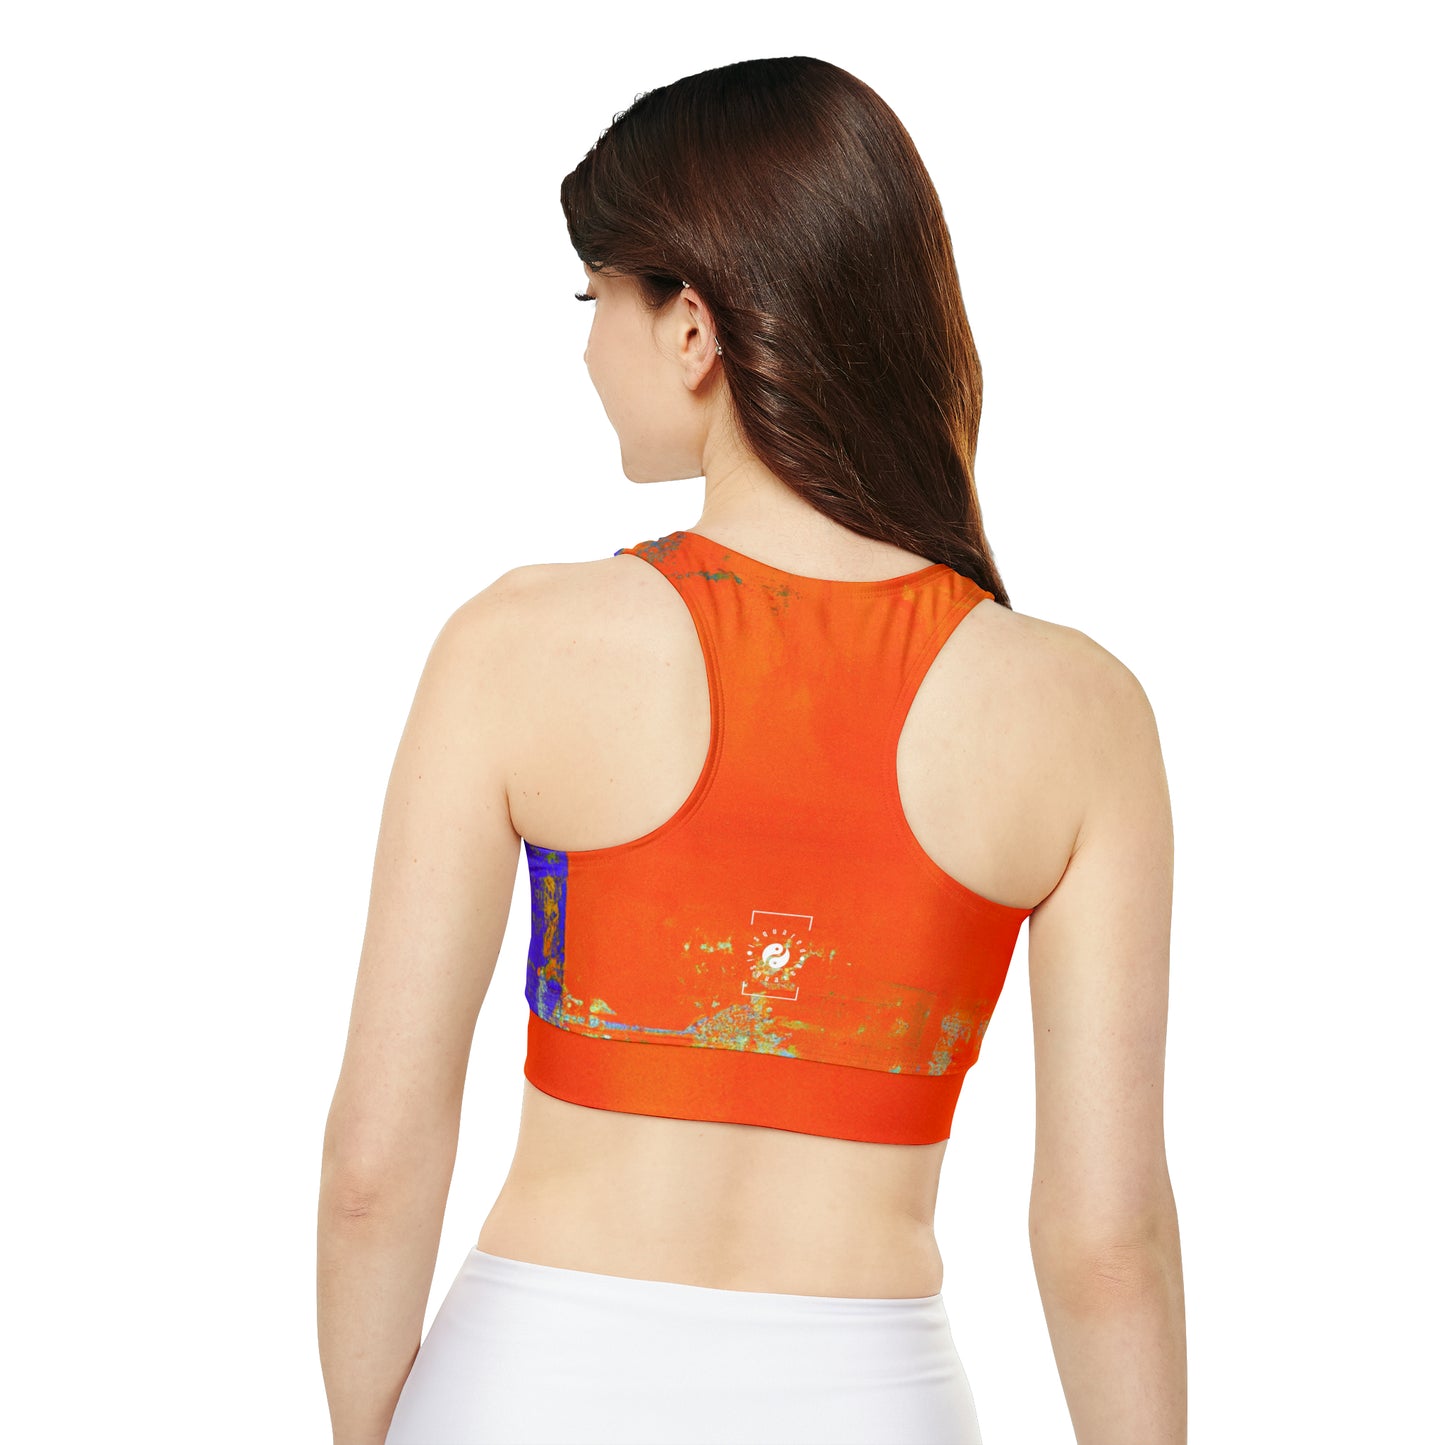 Giovanni Marcelli - Lined & Padded Sports Bra